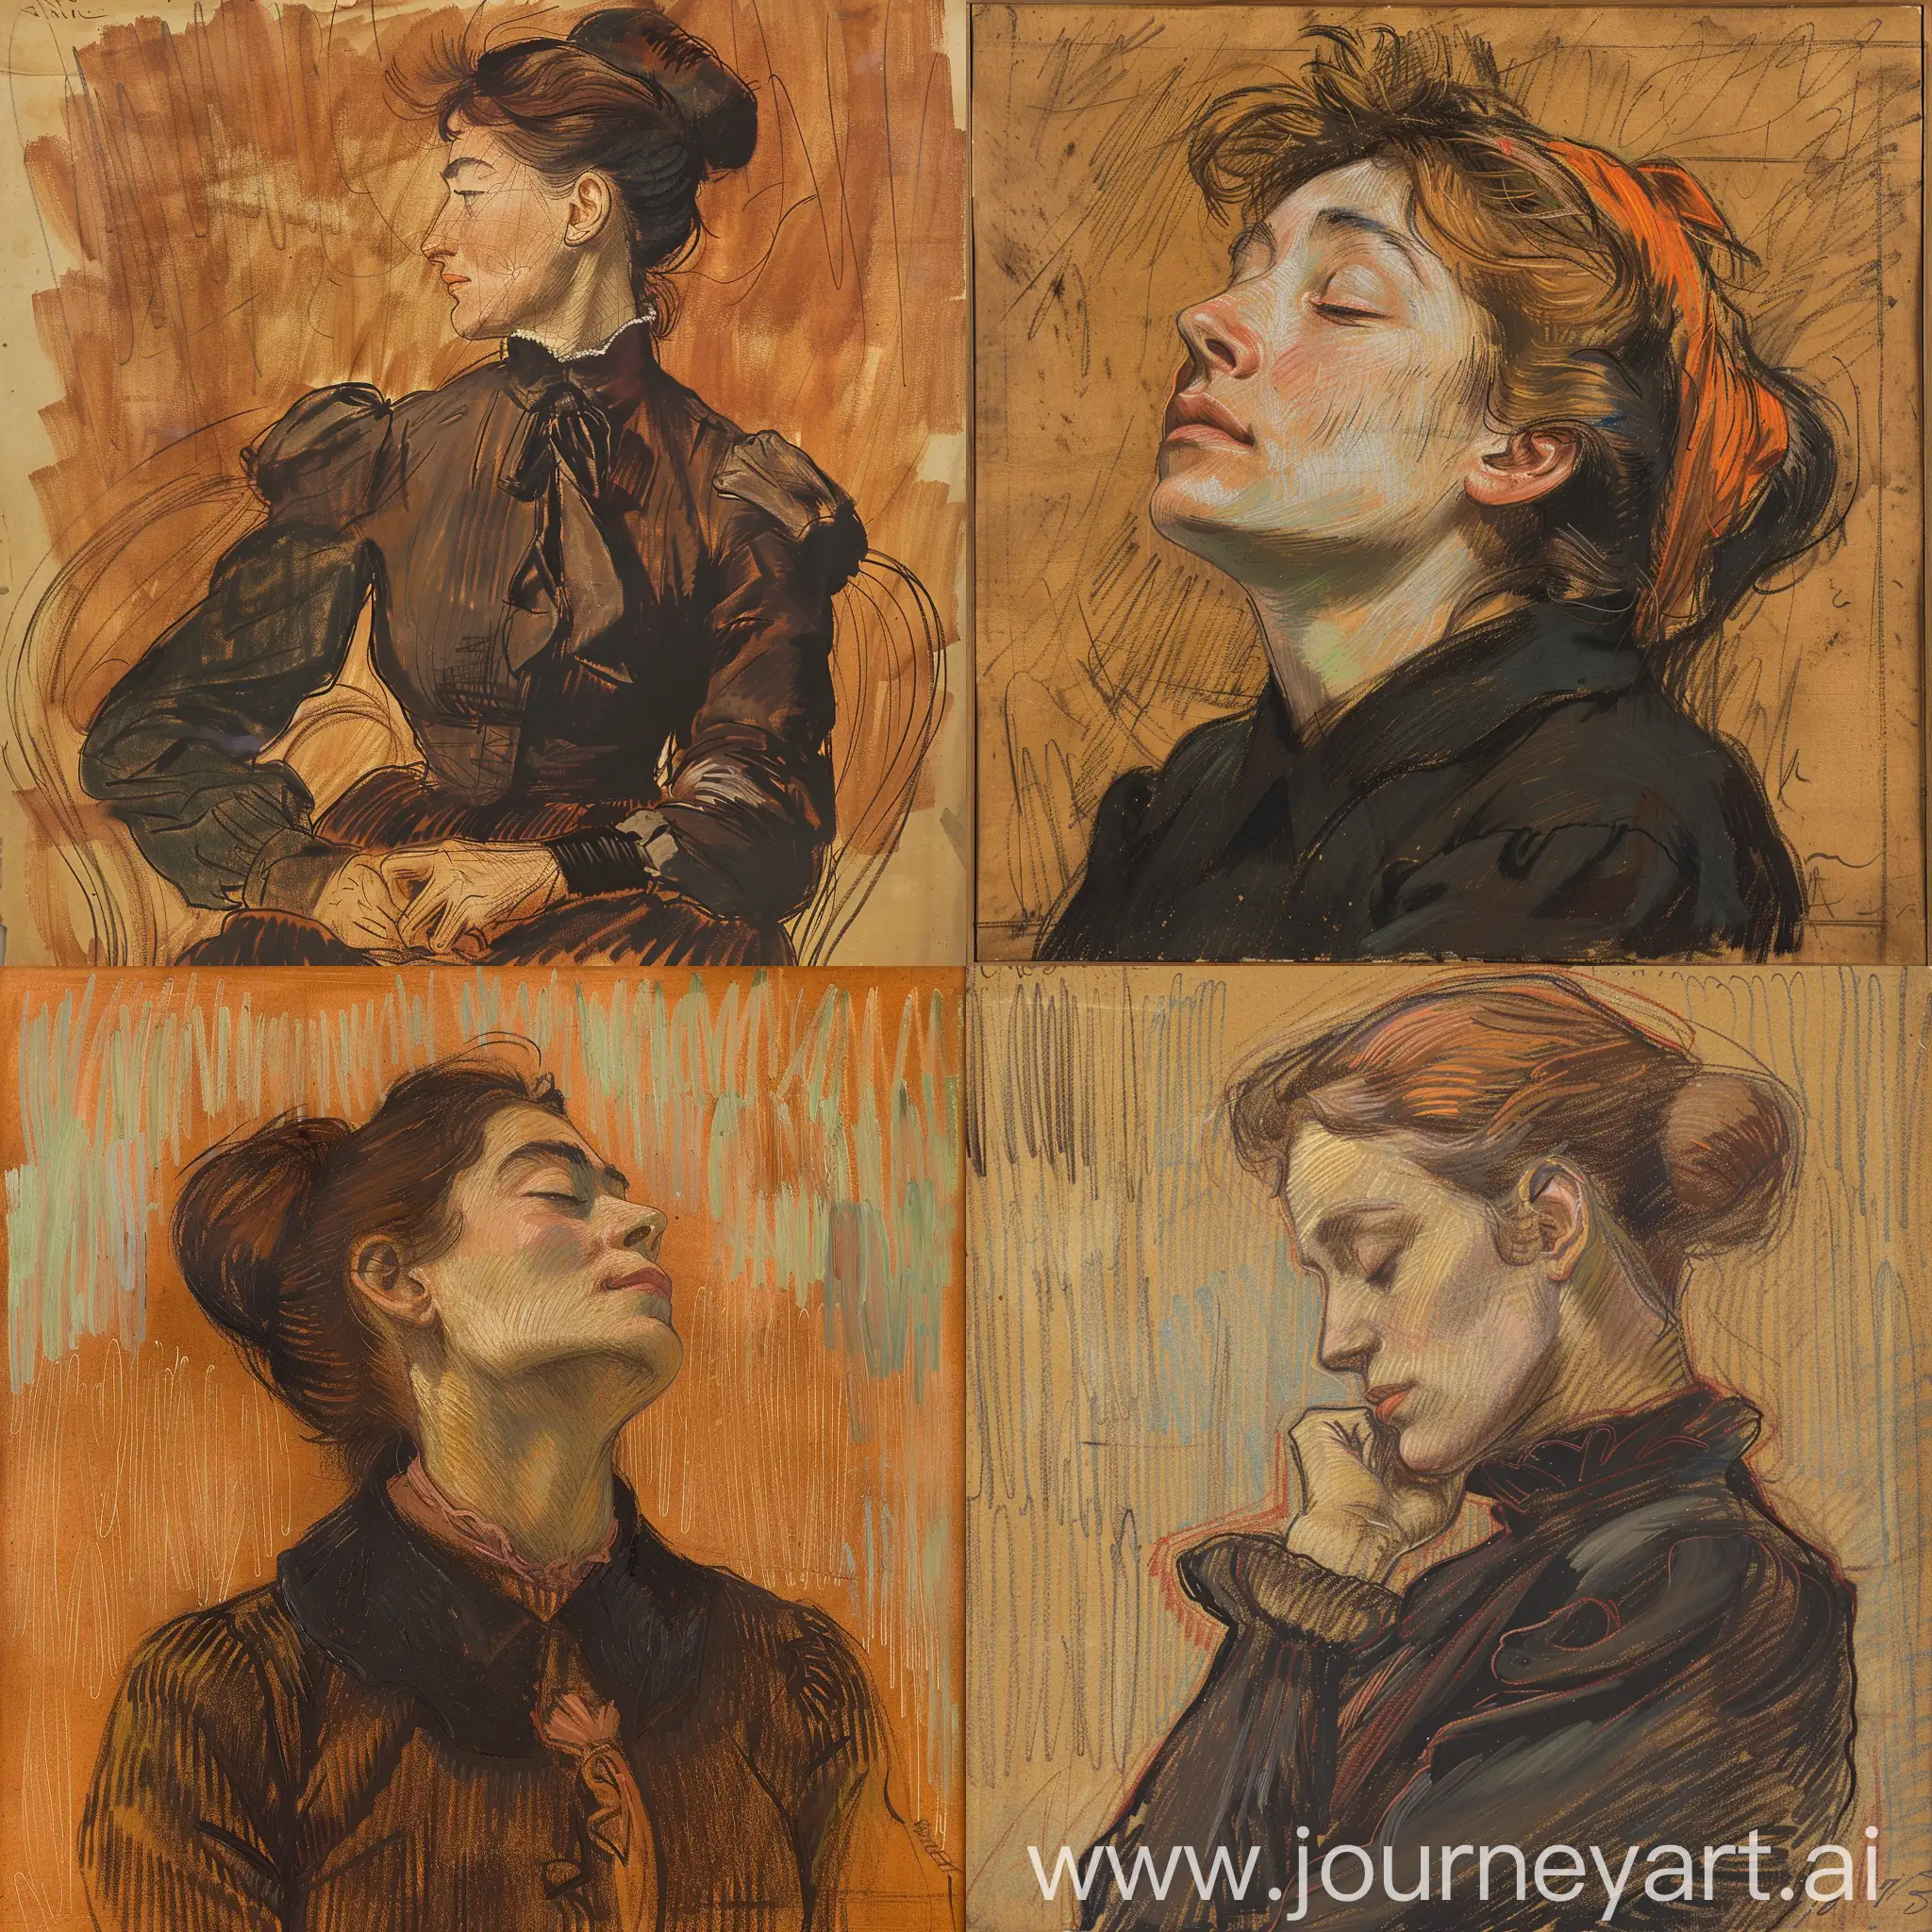 Rough-European-Woman-Portrait-on-Brown-Background-Inspired-by-Toulouse-Lautrec-1889